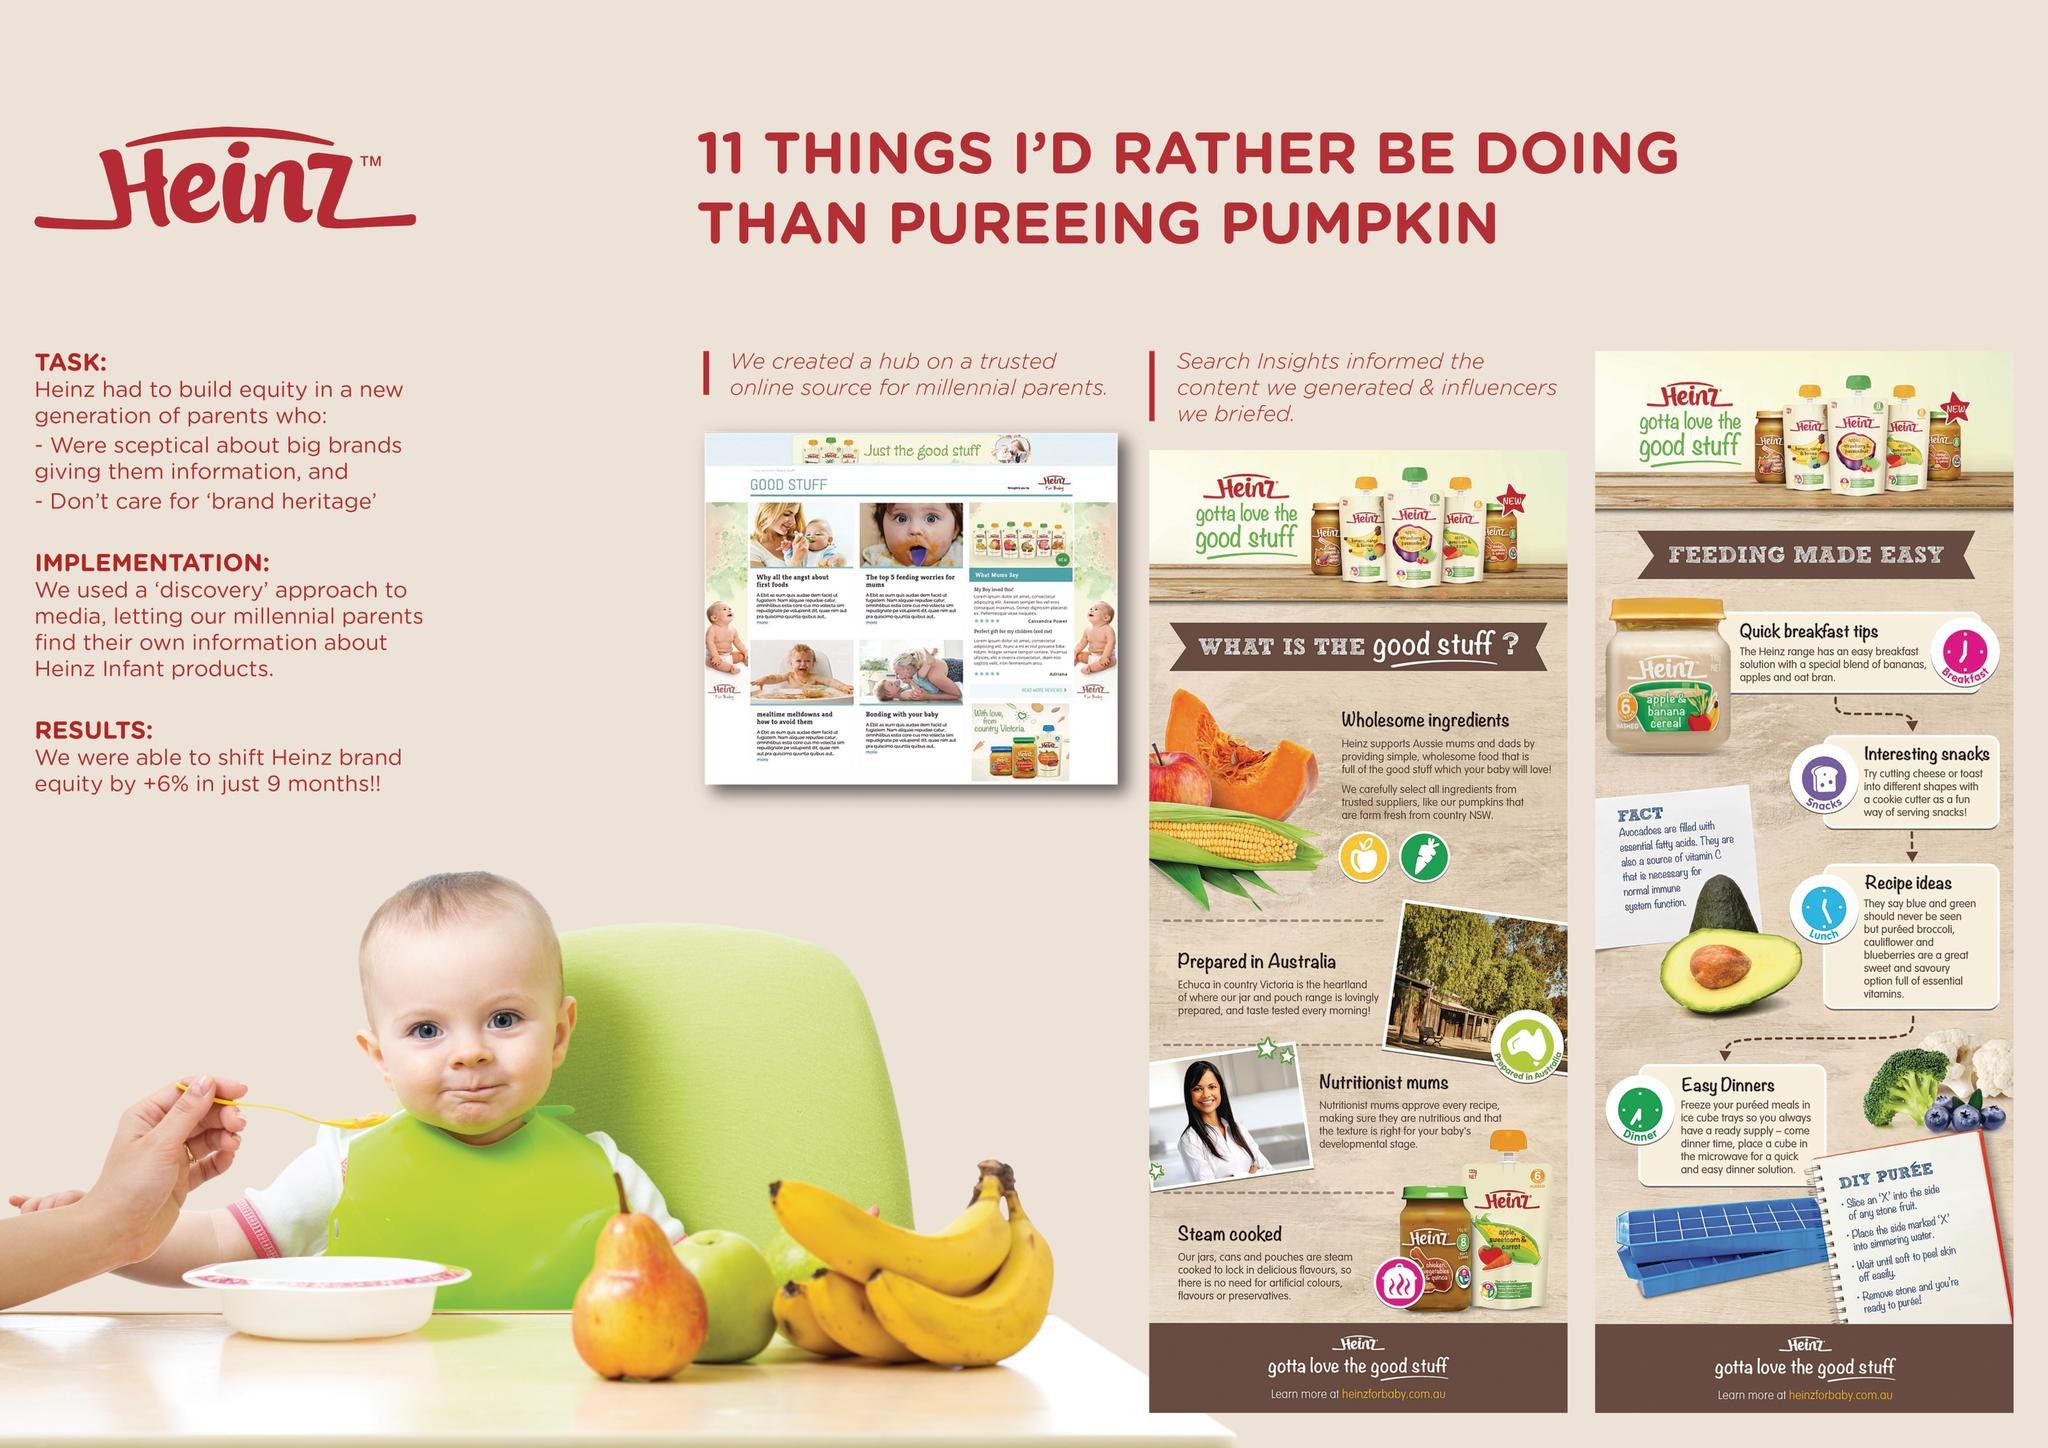 11 Things I’d Rather Do Than Puree Pumpkin, or  how search science helped Heinz 